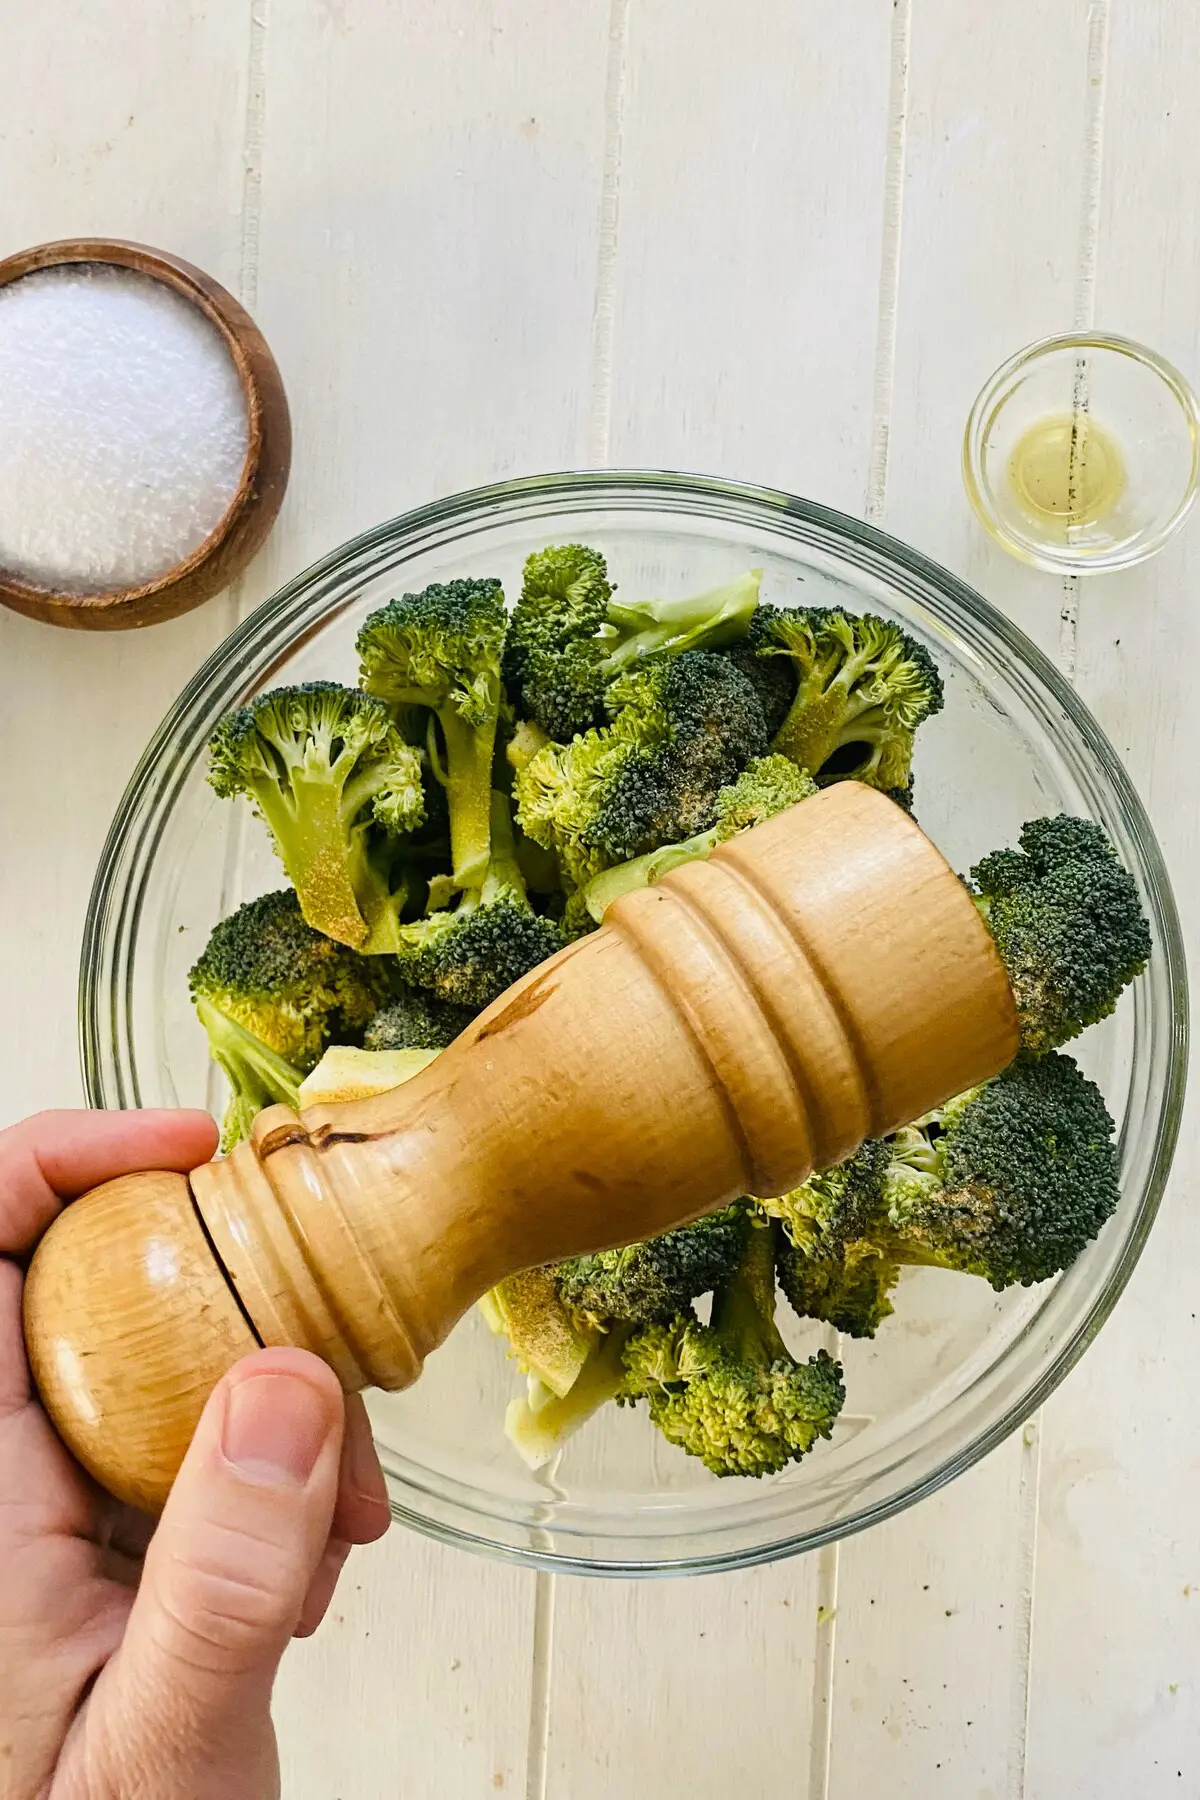 a peppermill and raw broccoli.